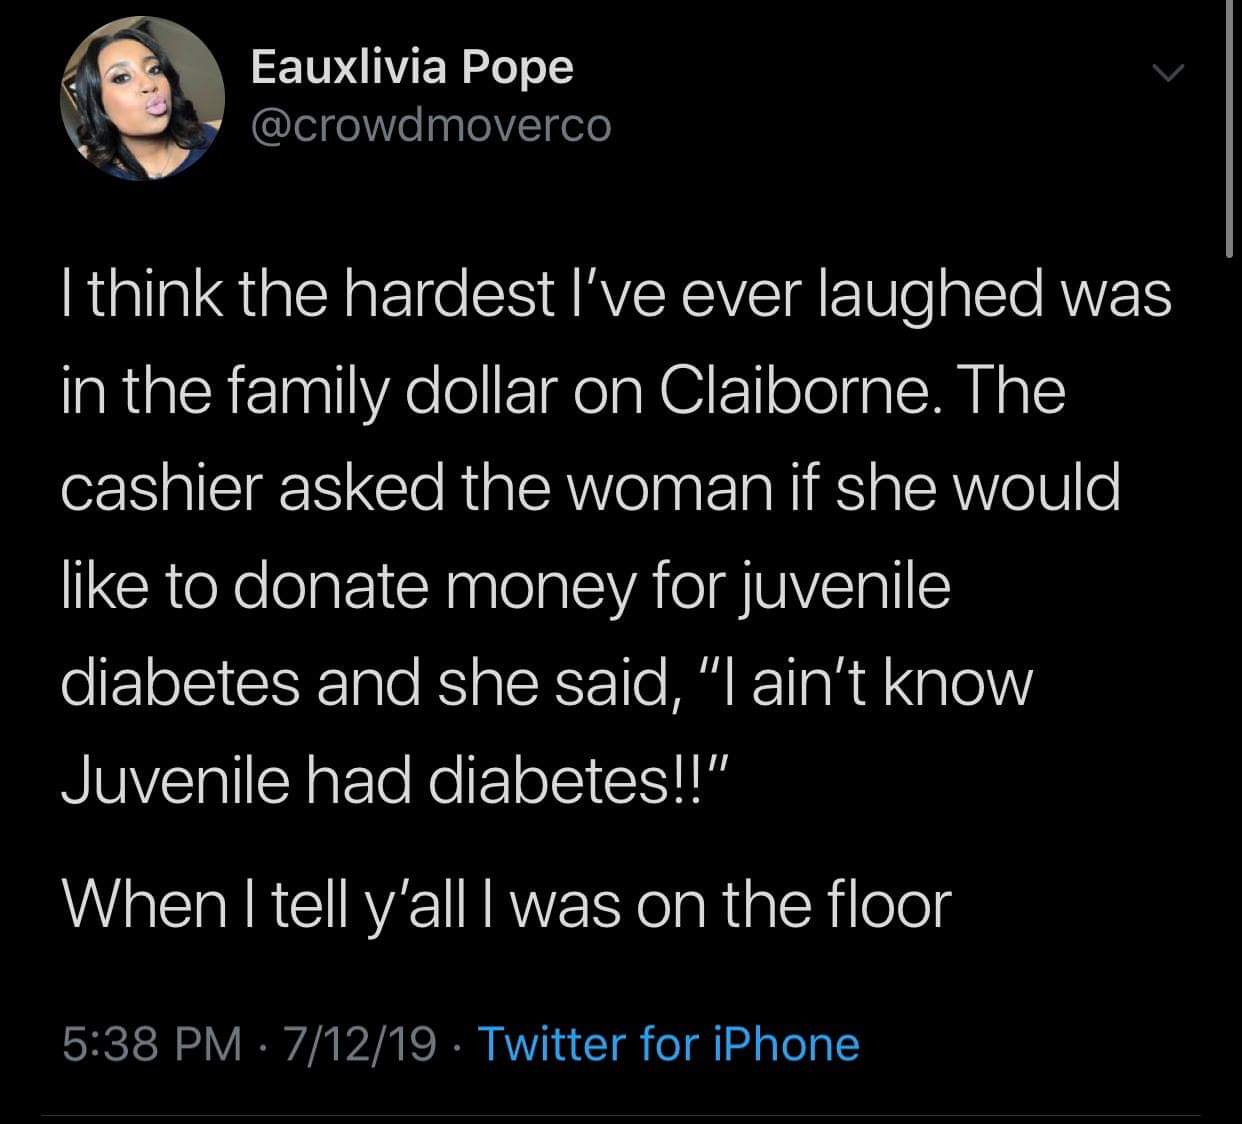 screenshot - Eauxlivia Pope I think the hardest I've ever laughed was in the family dollar on Claiborne. The cashier asked the woman if she would to donate money for juvenile diabetes and she said, "I ain't know Juvenile had diabetes!!" When I tell y'all 